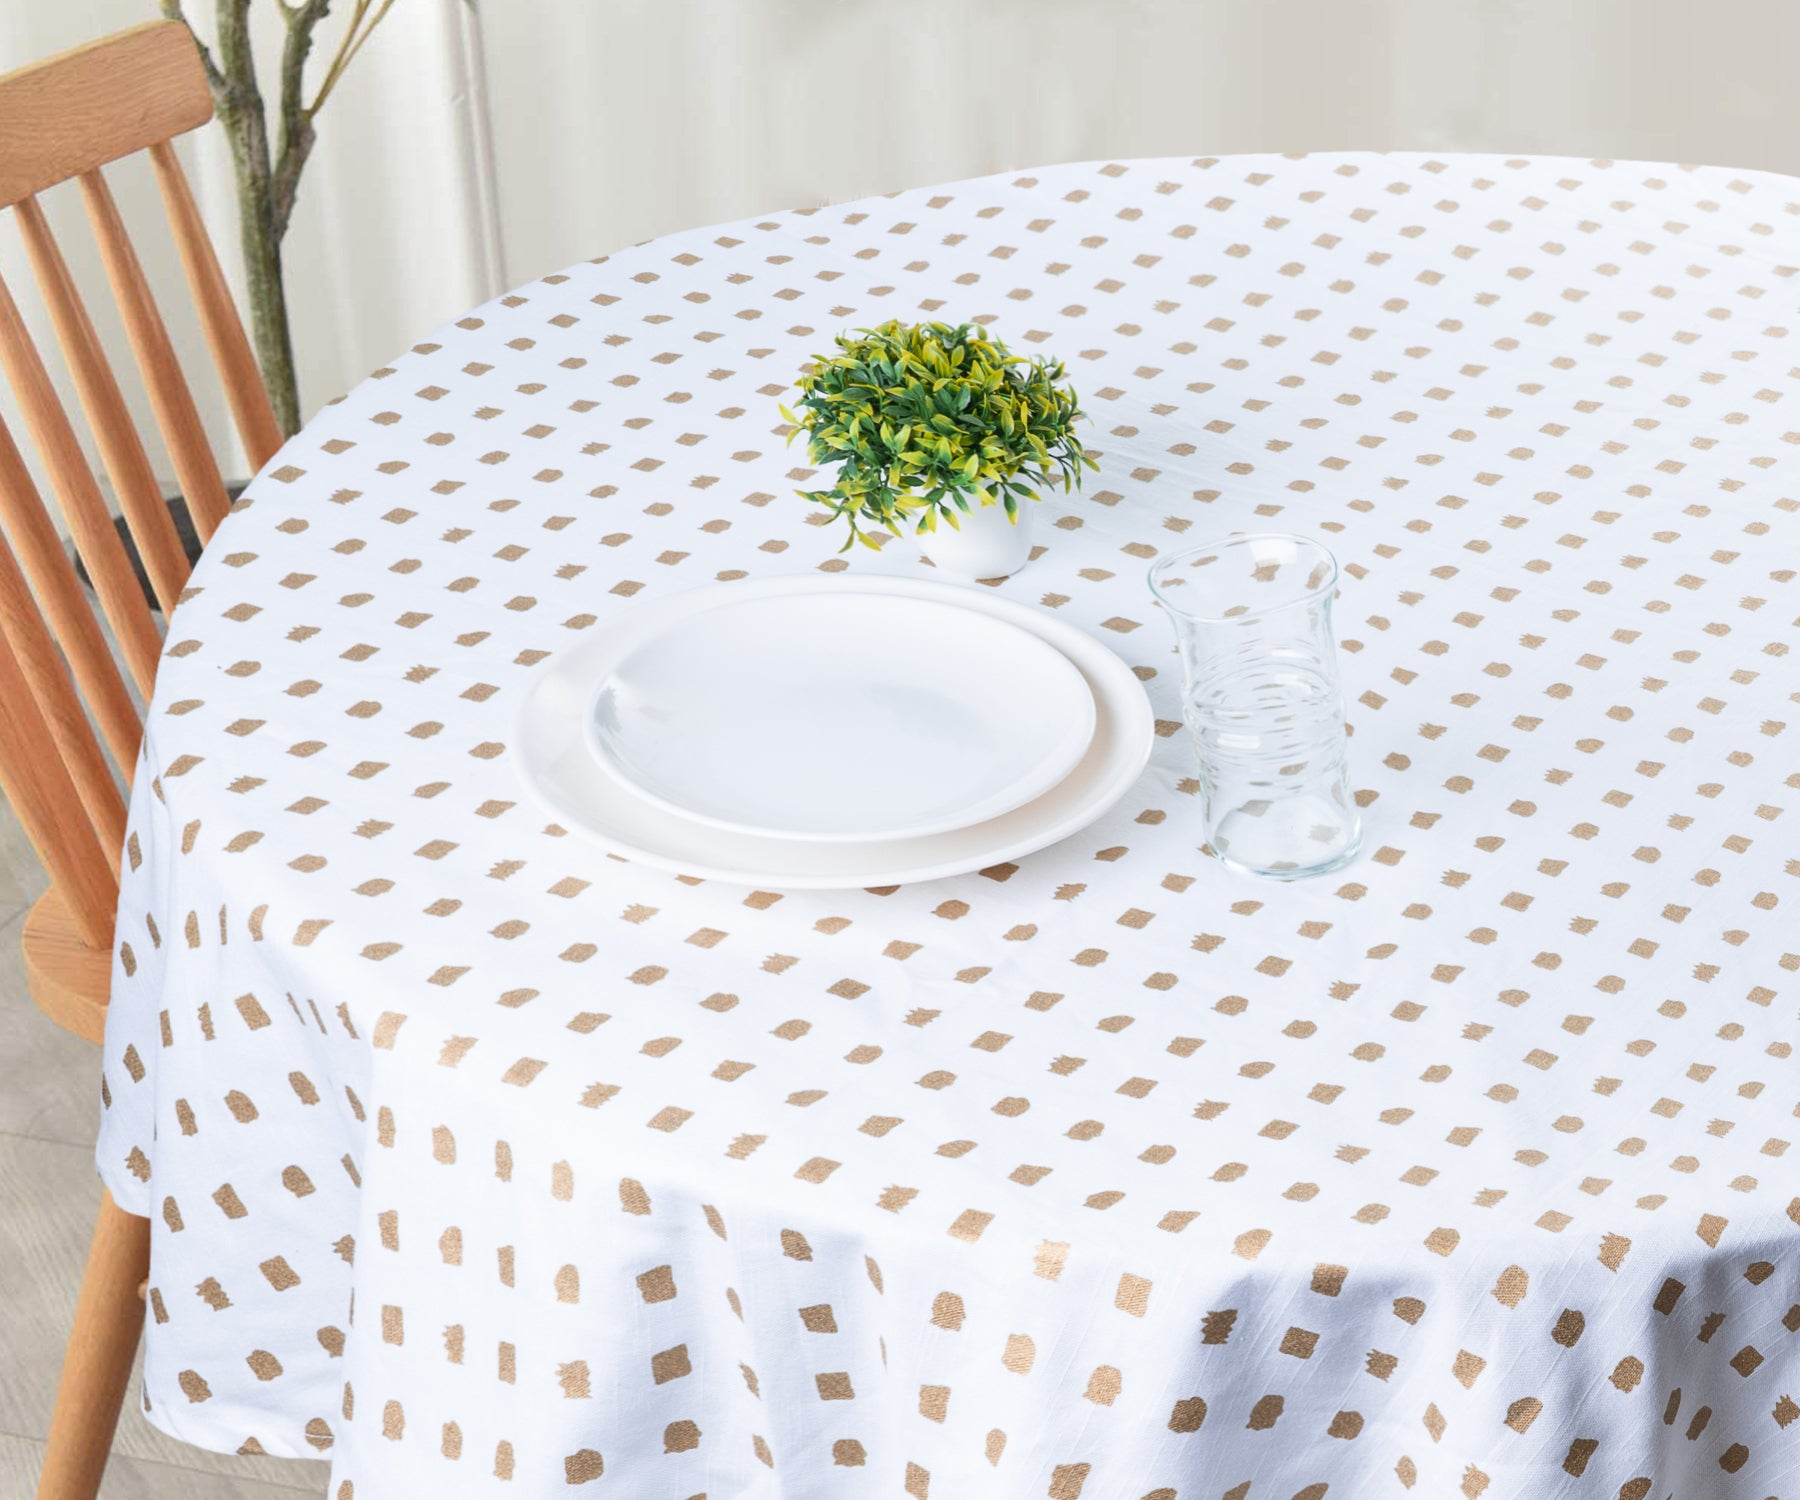 Transform your table settings with round white tablecloths, cloth elegance, refreshing green choices, and durable outdoor tablecloths.